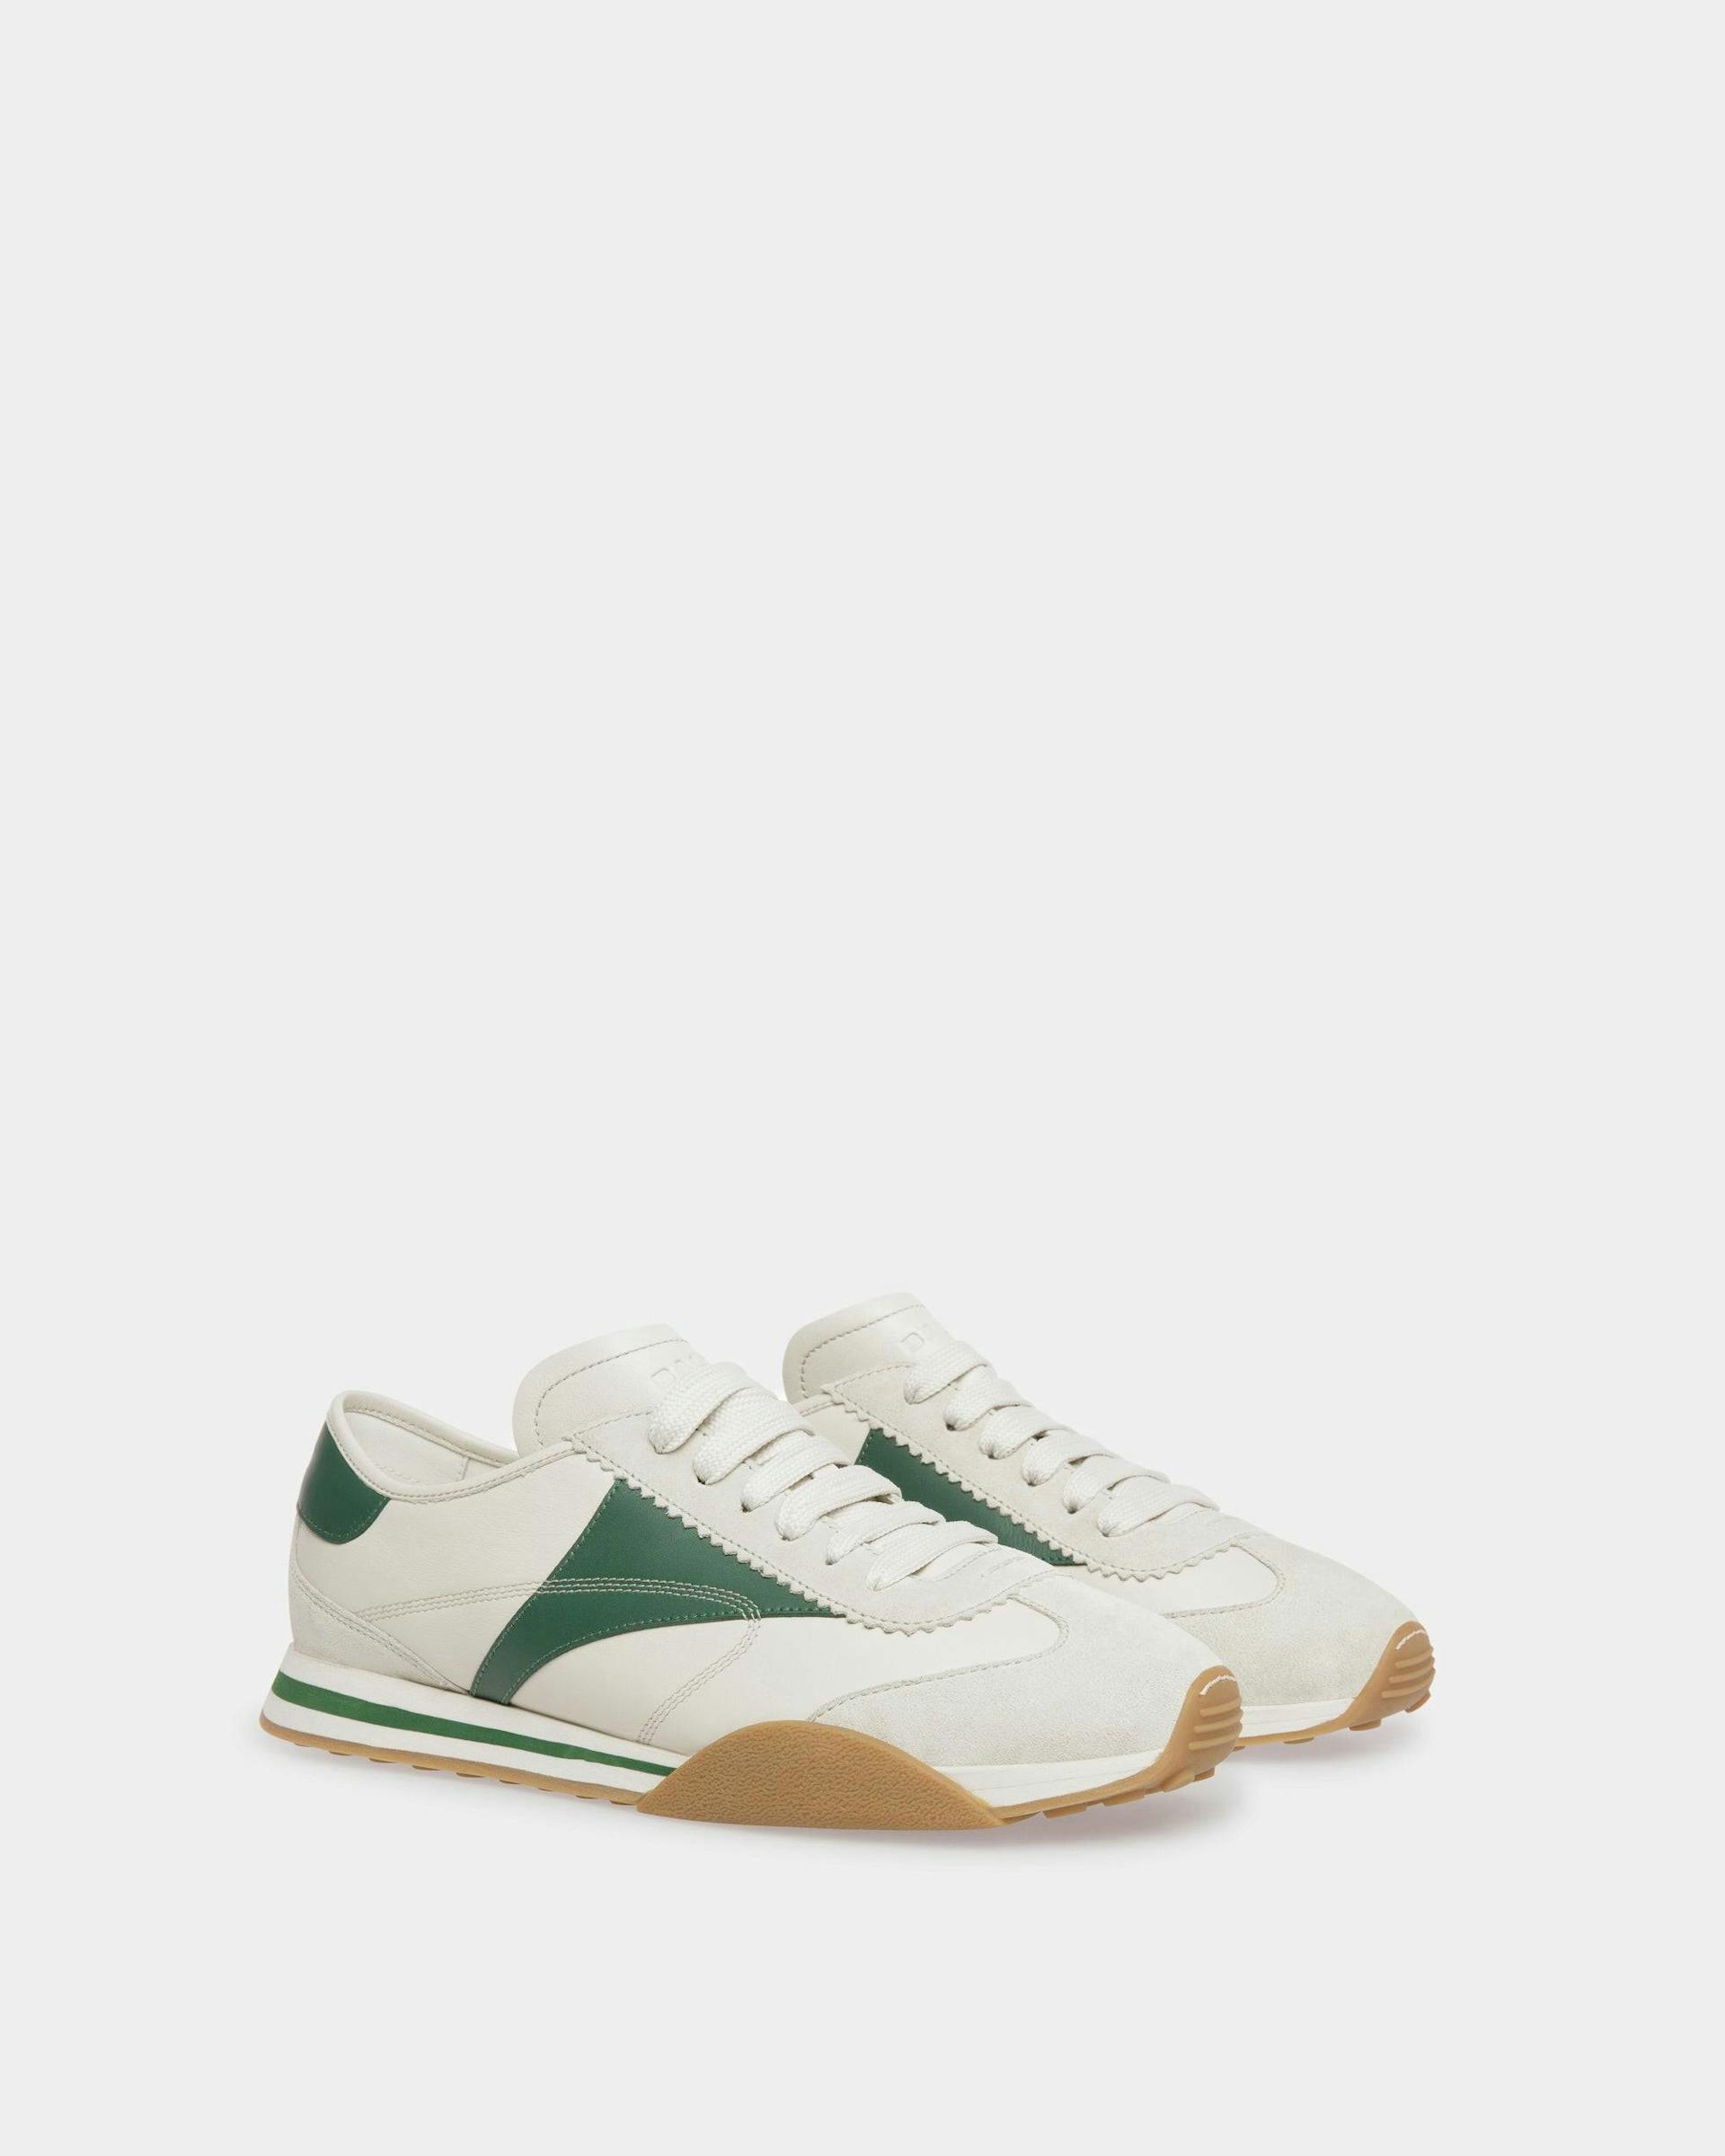 Sussex Sneakers In Dusty White And Kelly Green Leather - Men's - Bally - 03